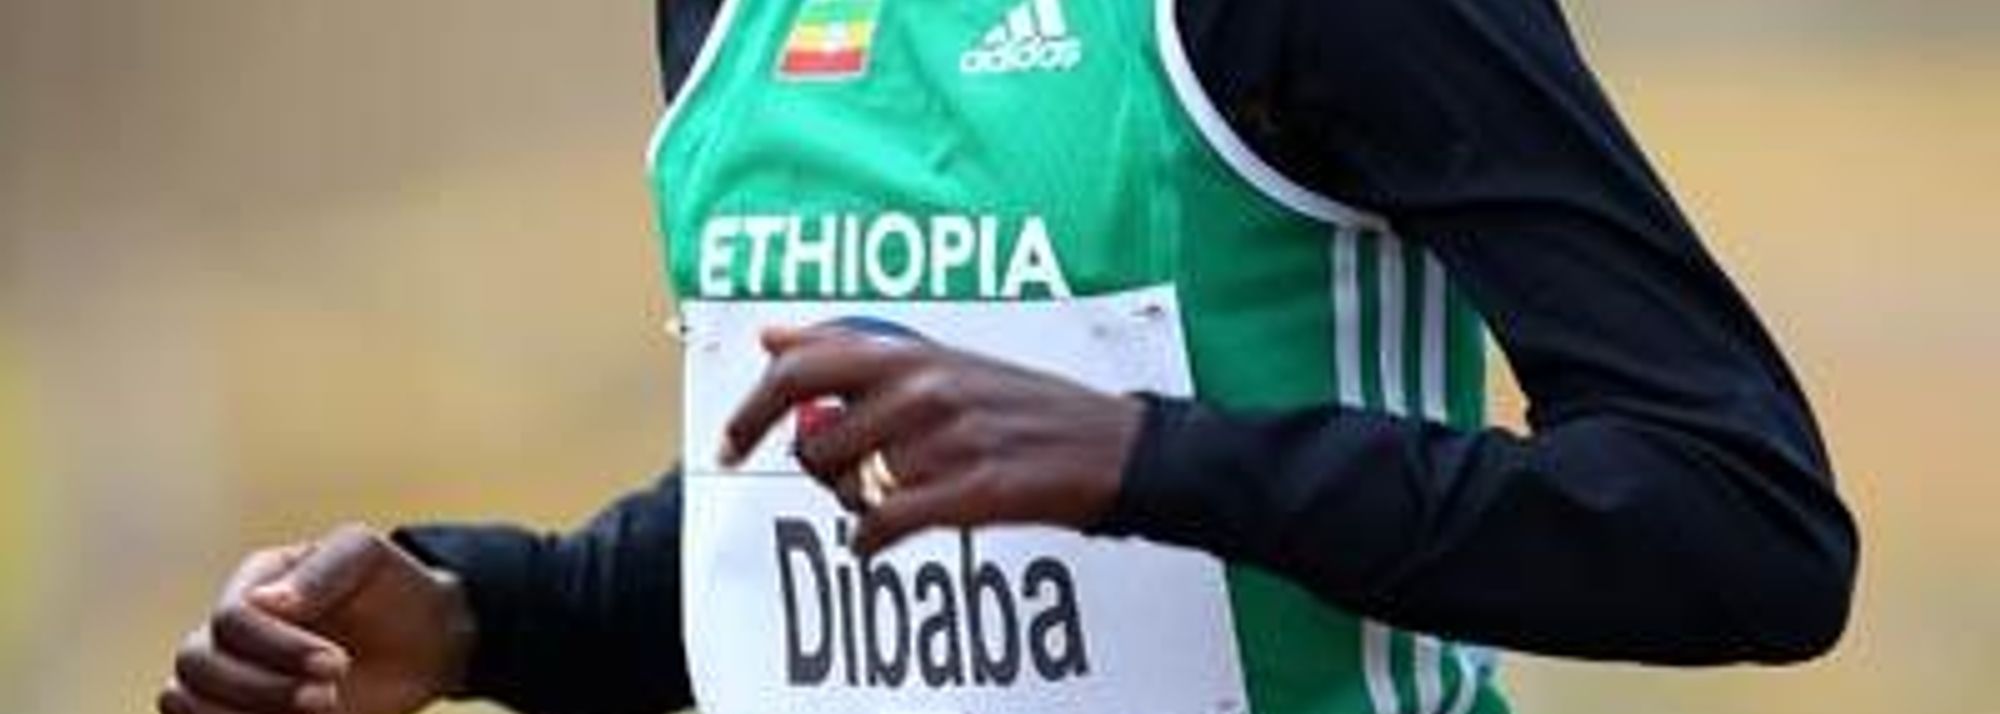 It was not Ethiopia’s day at the World Cross Country Championships in Bydgoszcz, their men were well beaten and the best their women could do was a senior bronze by Meselech Melkamu.